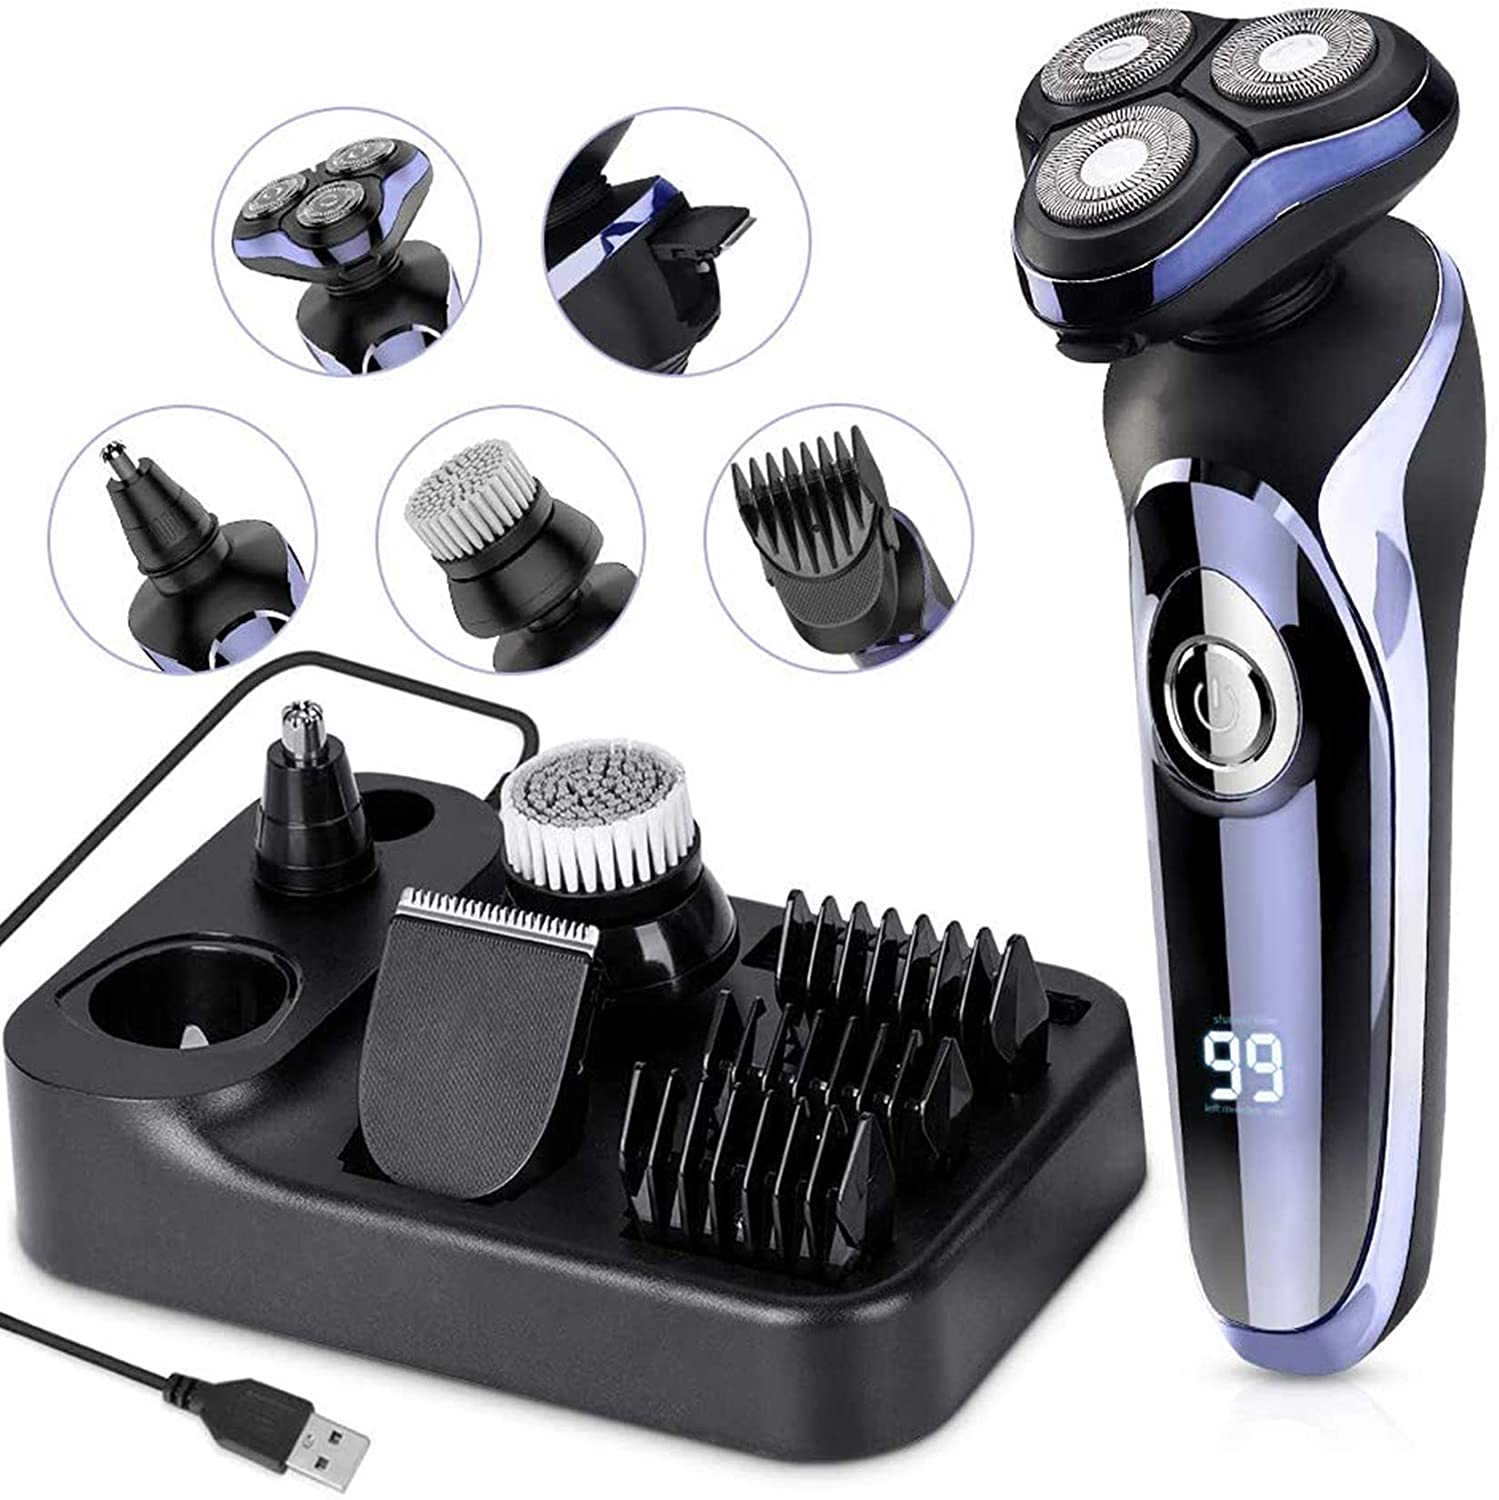 Electric Razor for Men, MANLI 5 in 1 Hair Clipper Rotary Shaver Beard Trimmer, Wet Dry Men Shaver Waterproof USB Fast Charging, Cordless Beard, Nose, Hair Trimmer, Best Gift for Men Dad - Home Decor Gifts and More